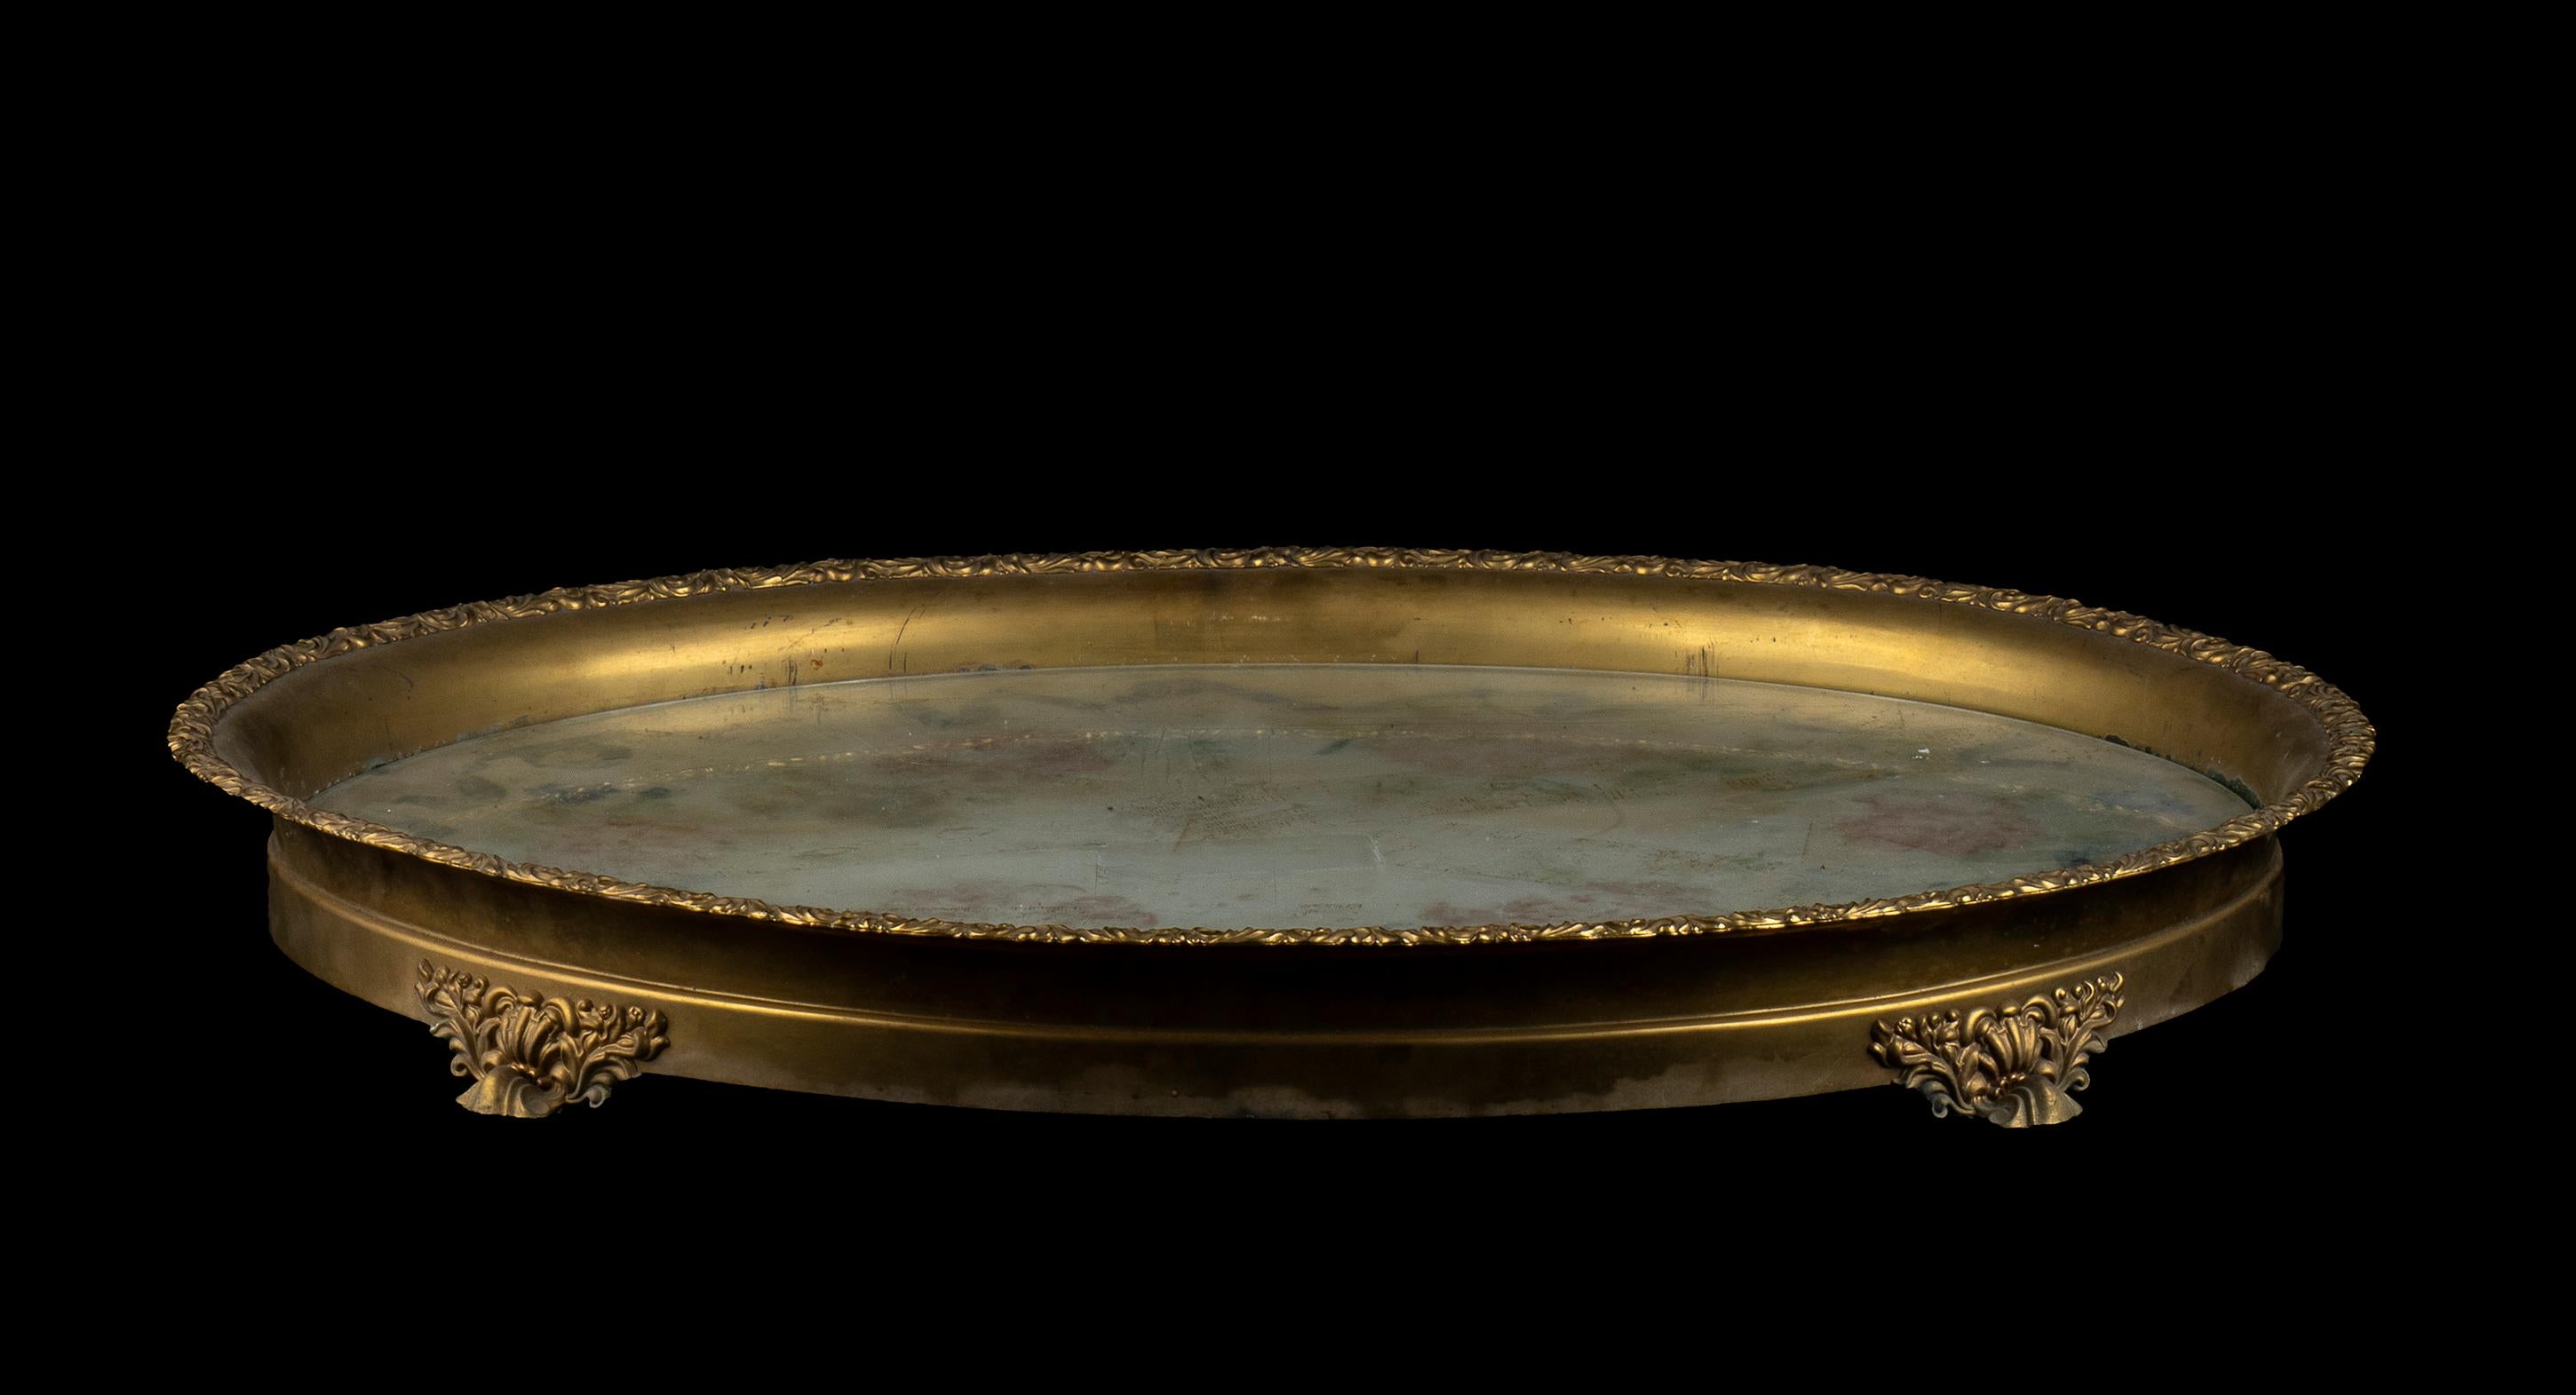 Bronze tray with marble top - France, 19th century
Of oval shape with a perimeter border with plant decorations; the marble top, painted in polychrome with flowers and ribbons, is protected by a glass sheet.
Height x width x depth: 8 x 63 x 47